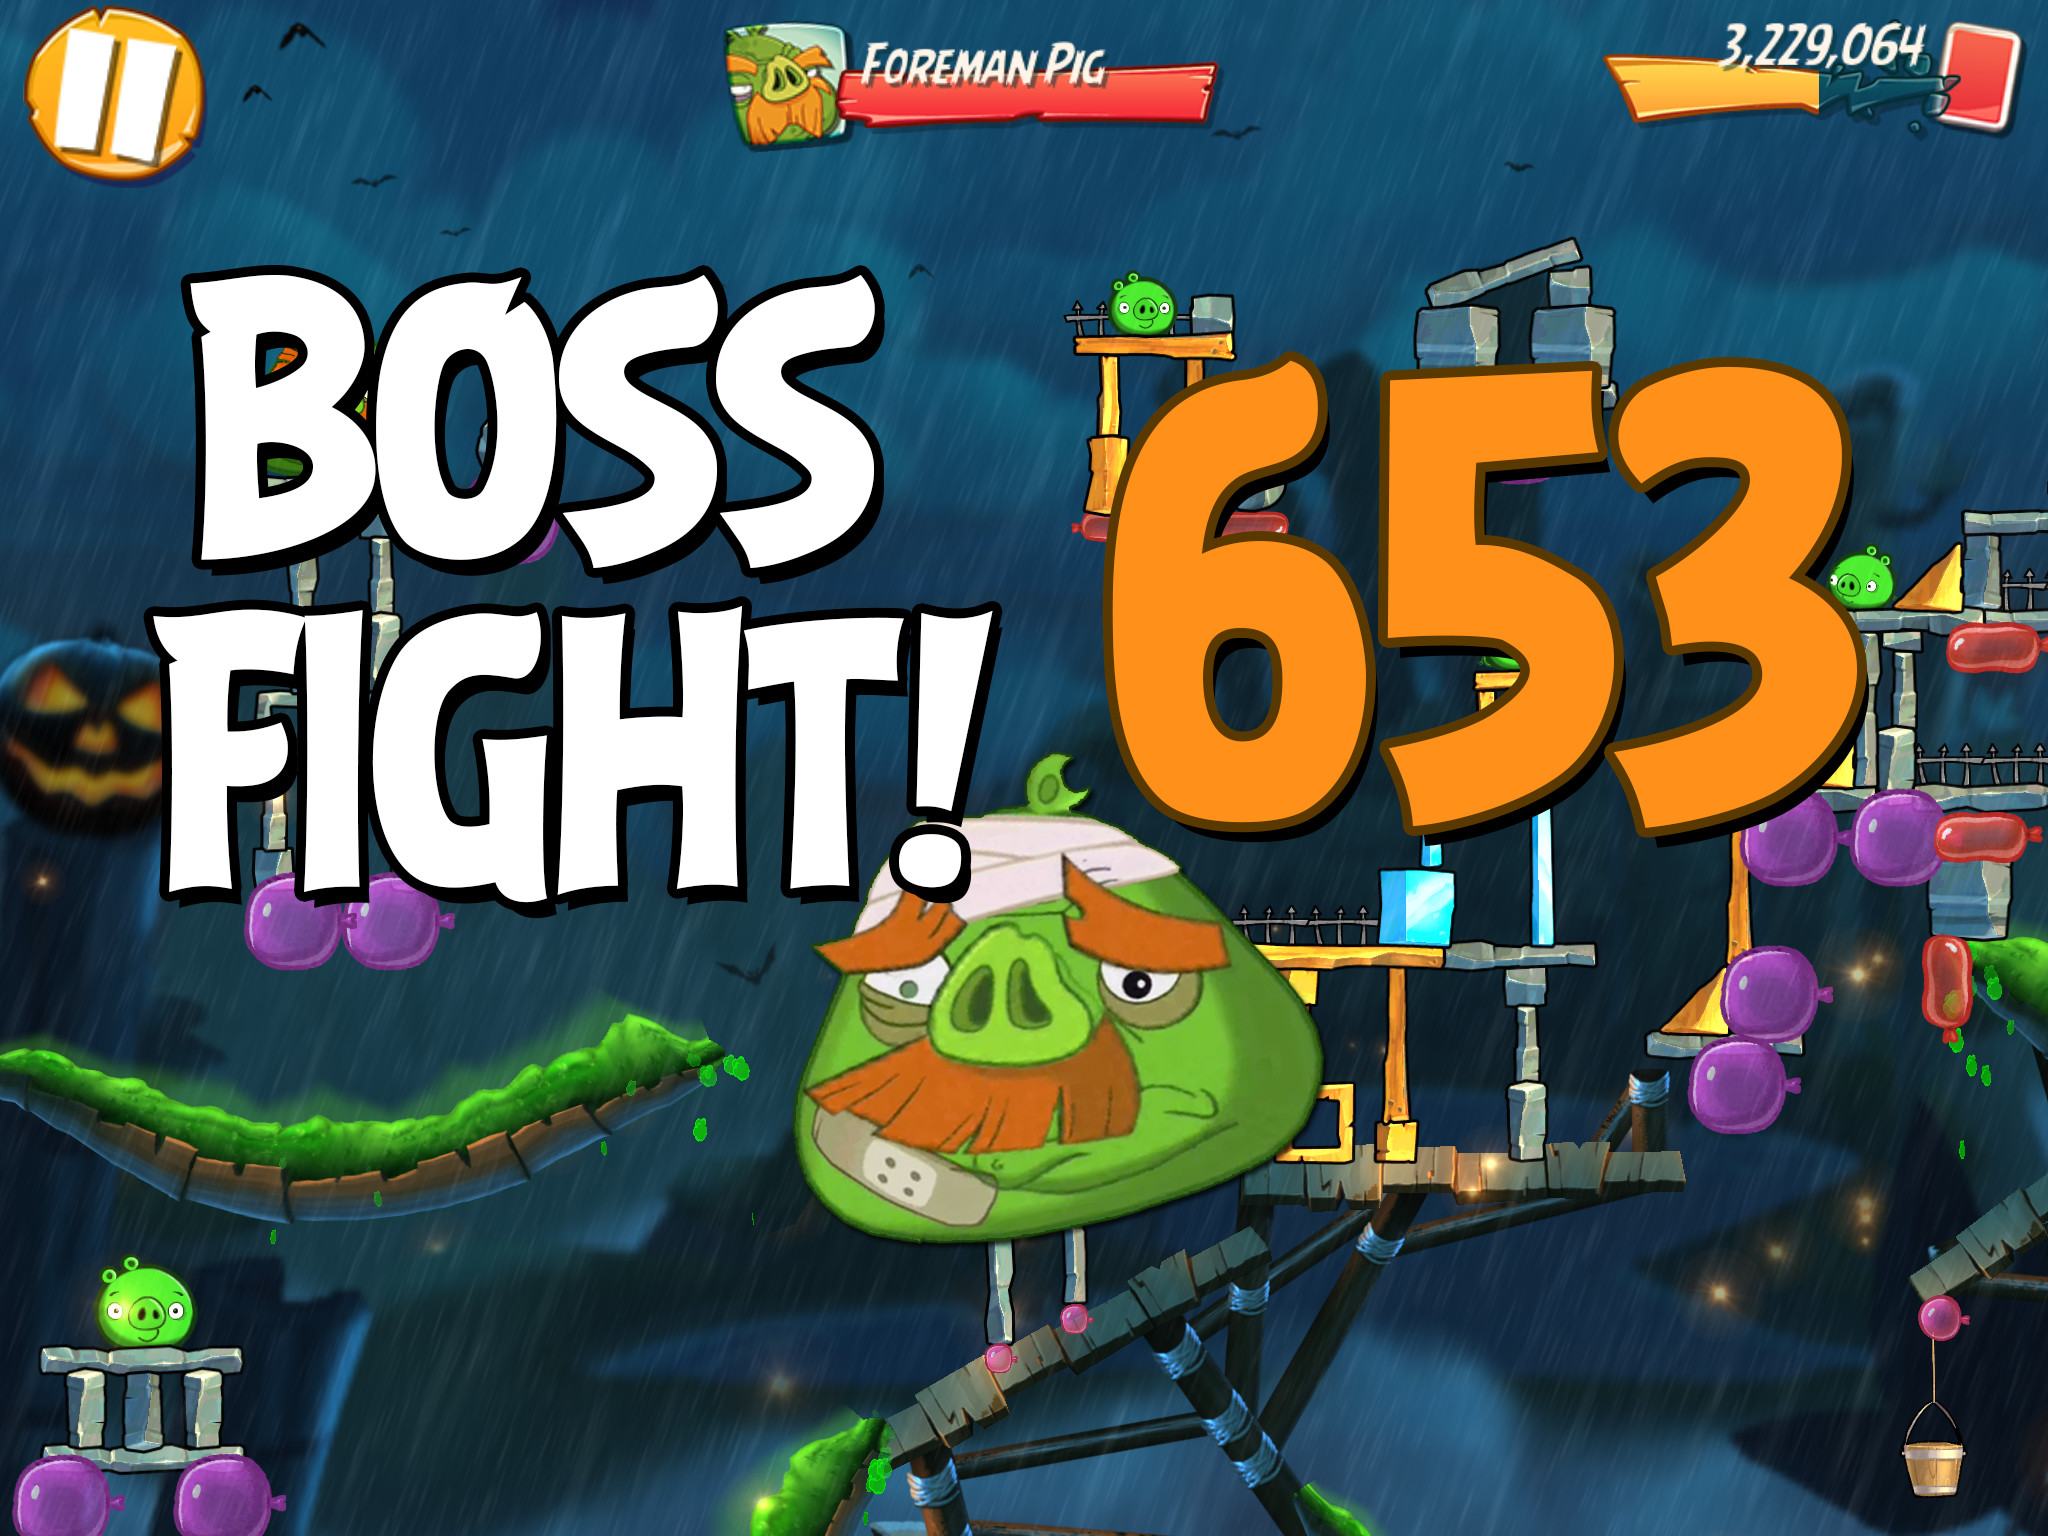 Angry-Birds-2-Boss-Fight-Level-653